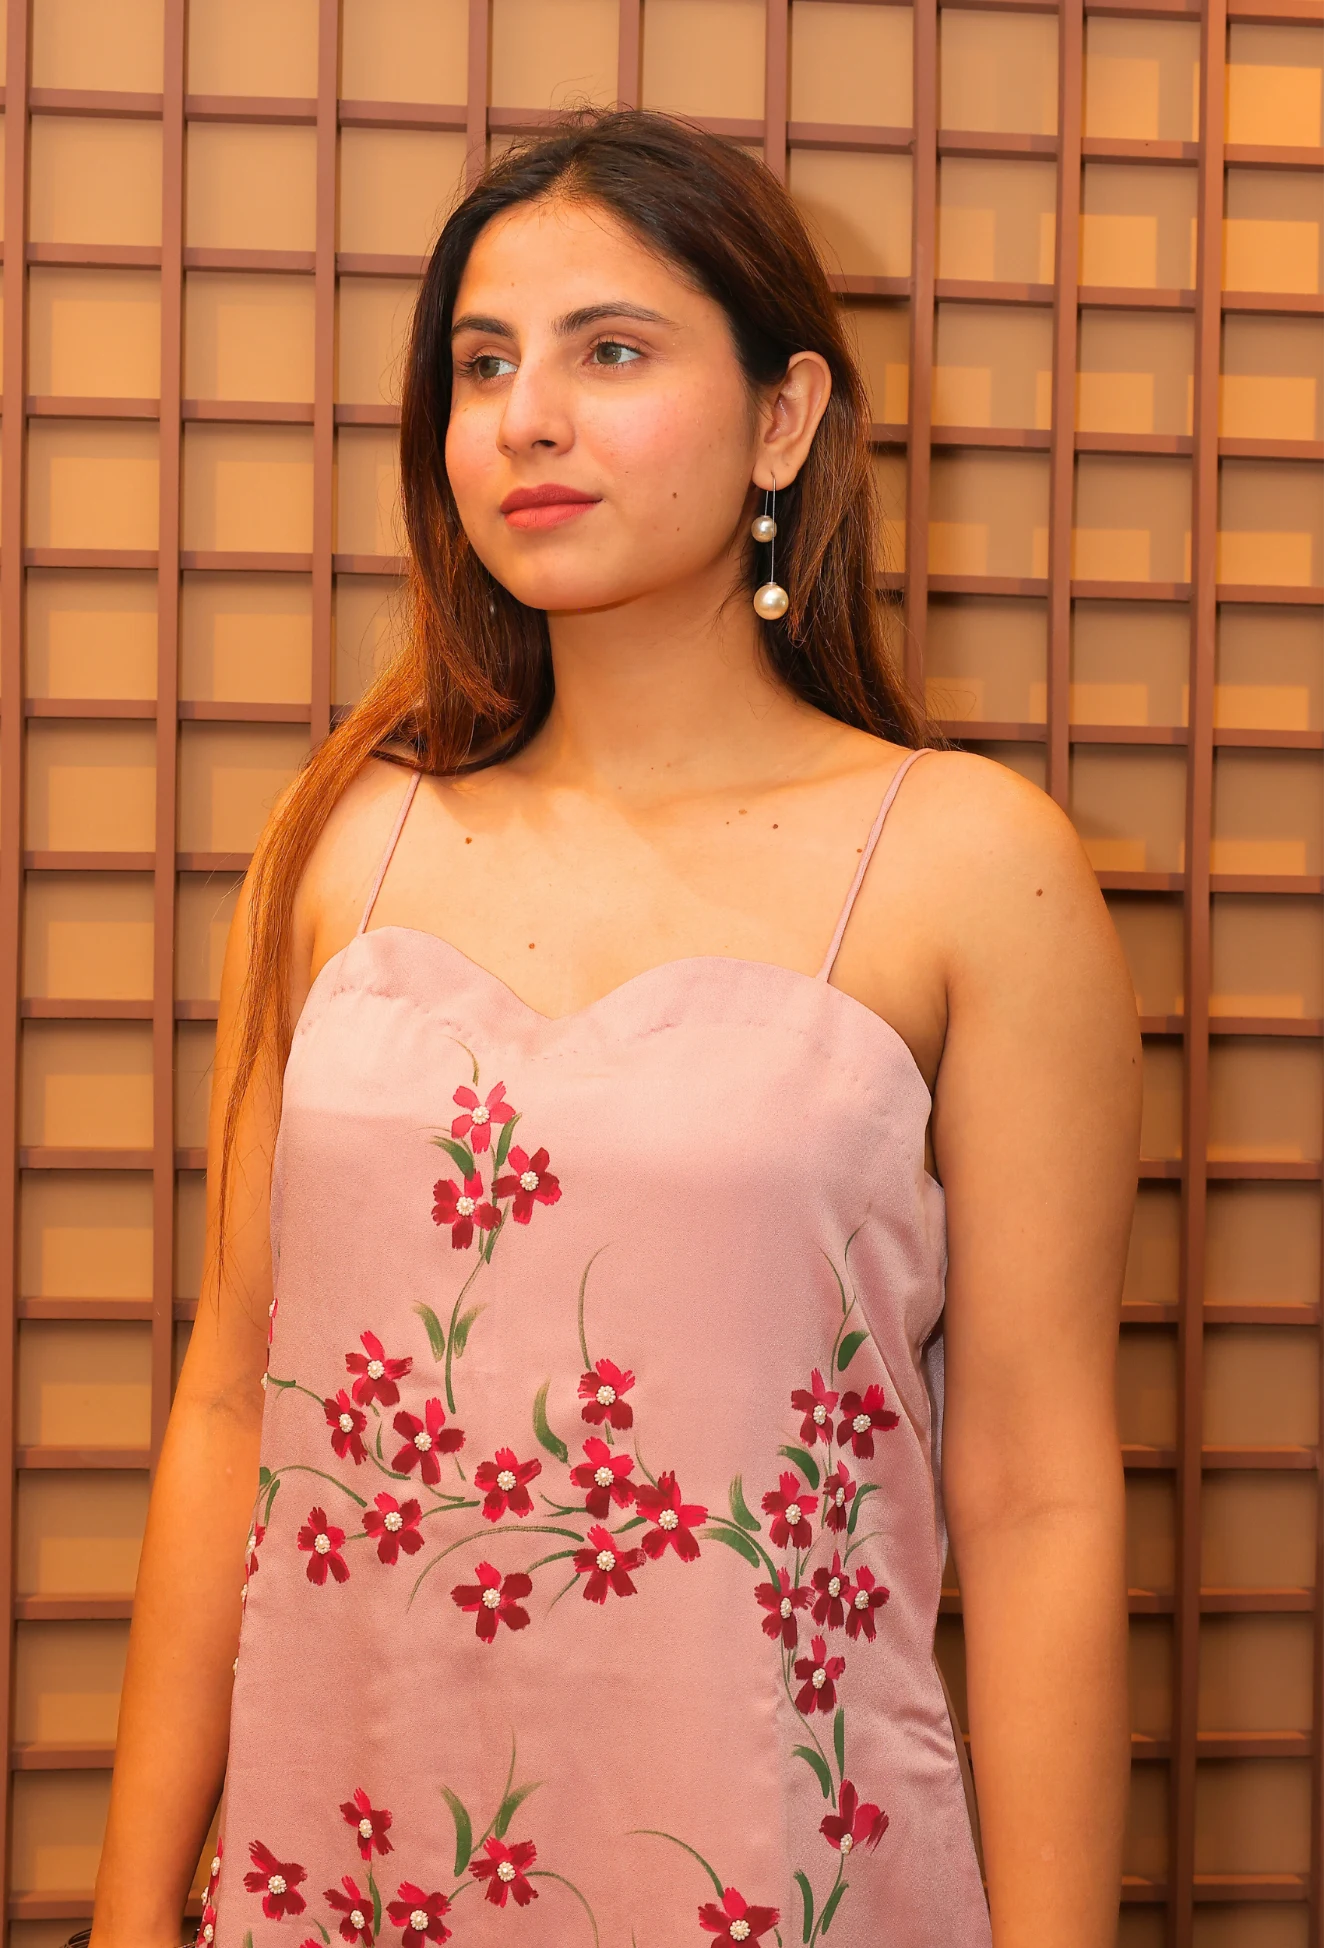 Experience the beauty of nature with Floral Desire. This hand painted and hand embroidered suit features a stunning floral design on imported armani satin fabric. With a delicate noodle strap neckline, this suit is a true masterpiece from designer brand Destiny by Anjali. Elevate your style and embrace the art of nature.